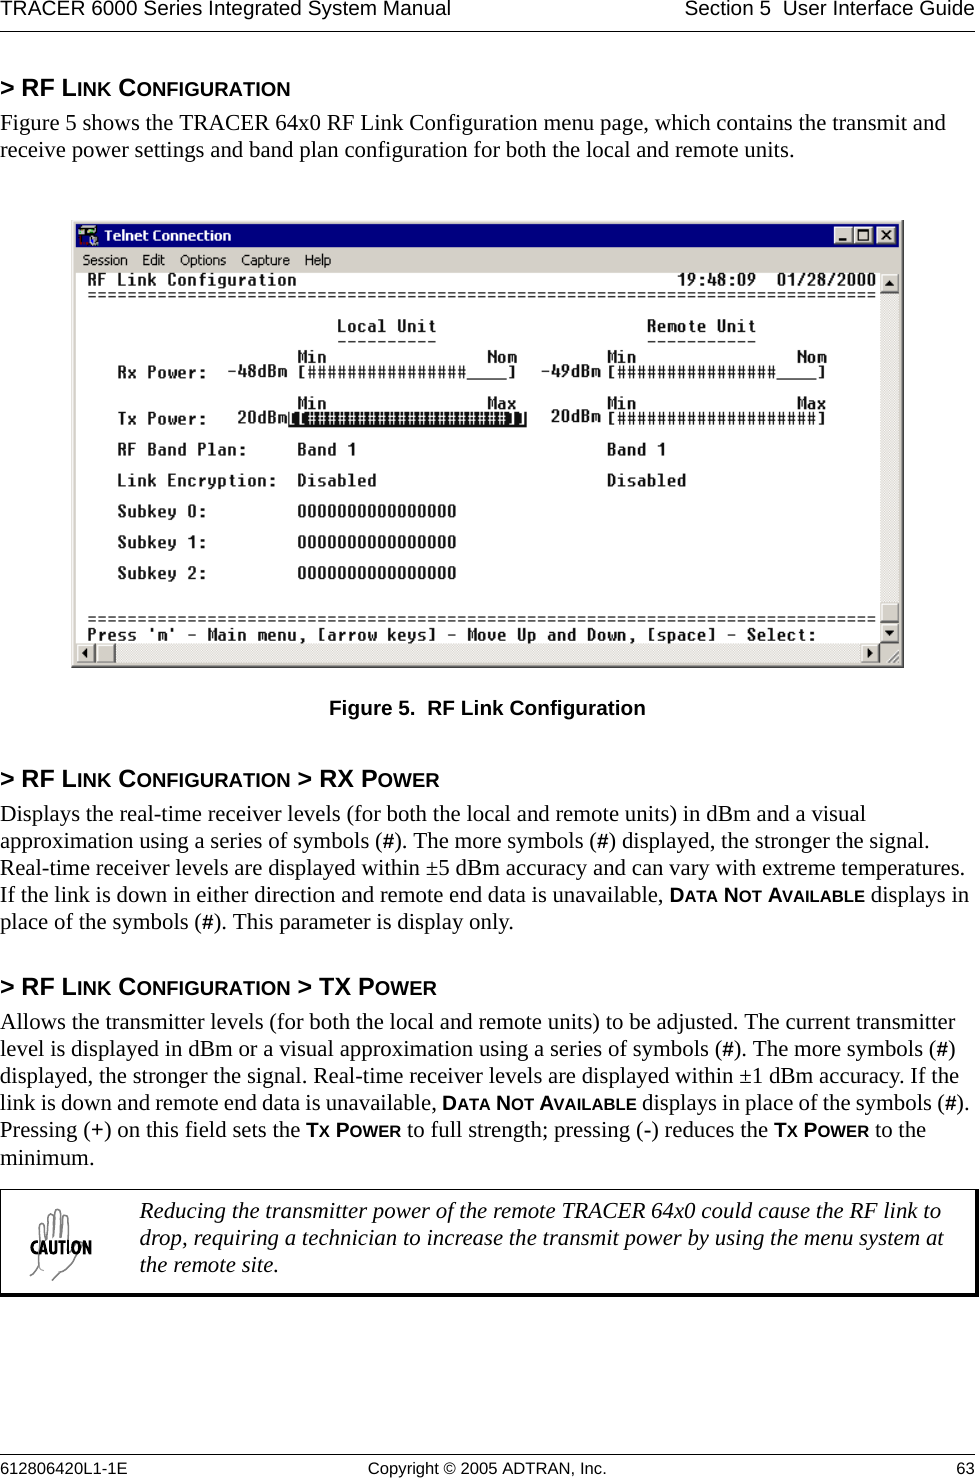 TRACER 6000 Series Integrated System Manual Section 5  User Interface Guide612806420L1-1E Copyright © 2005 ADTRAN, Inc. 63&gt; RF LINK CONFIGURATIONFigure 5 shows the TRACER 64x0 RF Link Configuration menu page, which contains the transmit and receive power settings and band plan configuration for both the local and remote units.Figure 5.  RF Link Configuration&gt; RF LINK CONFIGURATION &gt; RX POWERDisplays the real-time receiver levels (for both the local and remote units) in dBm and a visual approximation using a series of symbols (#). The more symbols (#) displayed, the stronger the signal. Real-time receiver levels are displayed within ±5 dBm accuracy and can vary with extreme temperatures. If the link is down in either direction and remote end data is unavailable, DATA NOT AVAILABLE displays in place of the symbols (#). This parameter is display only. &gt; RF LINK CONFIGURATION &gt; TX POWERAllows the transmitter levels (for both the local and remote units) to be adjusted. The current transmitter level is displayed in dBm or a visual approximation using a series of symbols (#). The more symbols (#) displayed, the stronger the signal. Real-time receiver levels are displayed within ±1 dBm accuracy. If the link is down and remote end data is unavailable, DATA NOT AVAILABLE displays in place of the symbols (#). Pressing (+) on this field sets the TX POWER to full strength; pressing (-) reduces the TX POWER to the minimum. Reducing the transmitter power of the remote TRACER 64x0 could cause the RF link to drop, requiring a technician to increase the transmit power by using the menu system at the remote site.